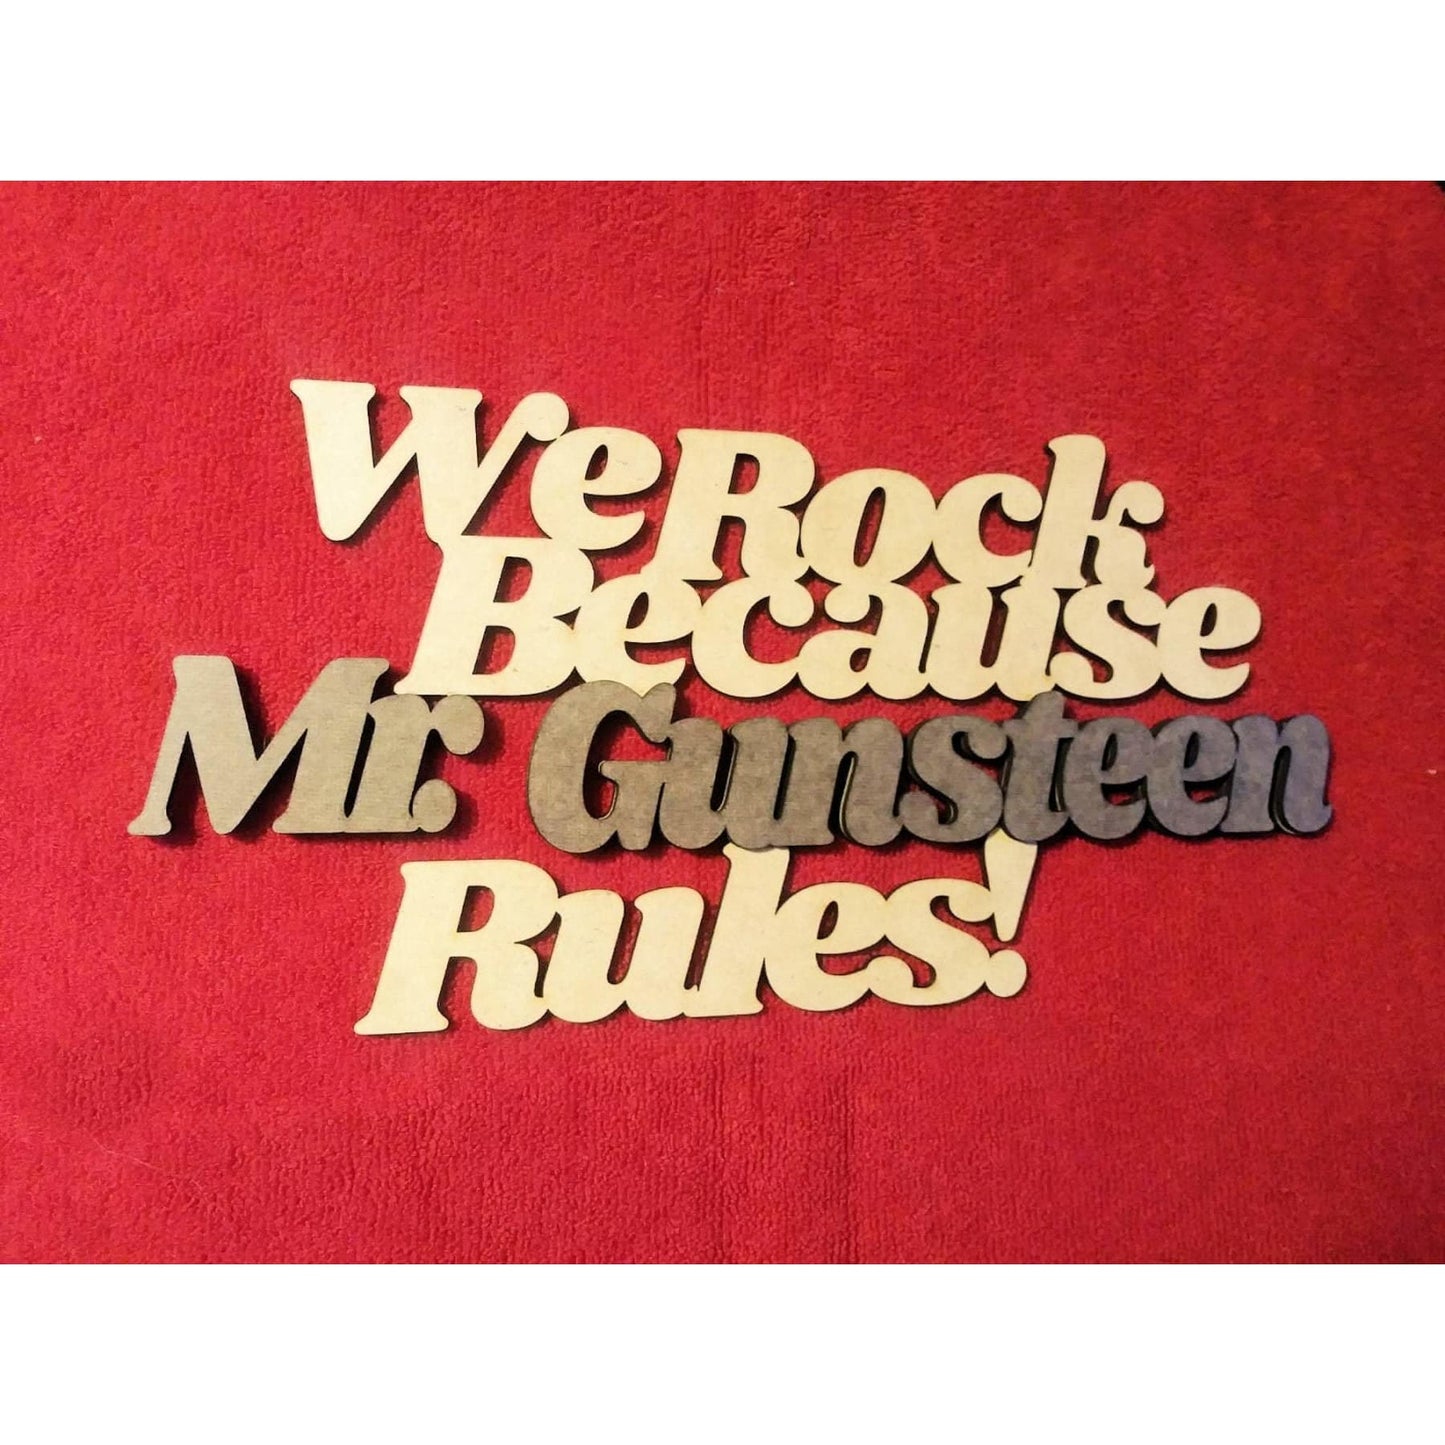 We Rock Because Teacher Name Rules Wall Decor